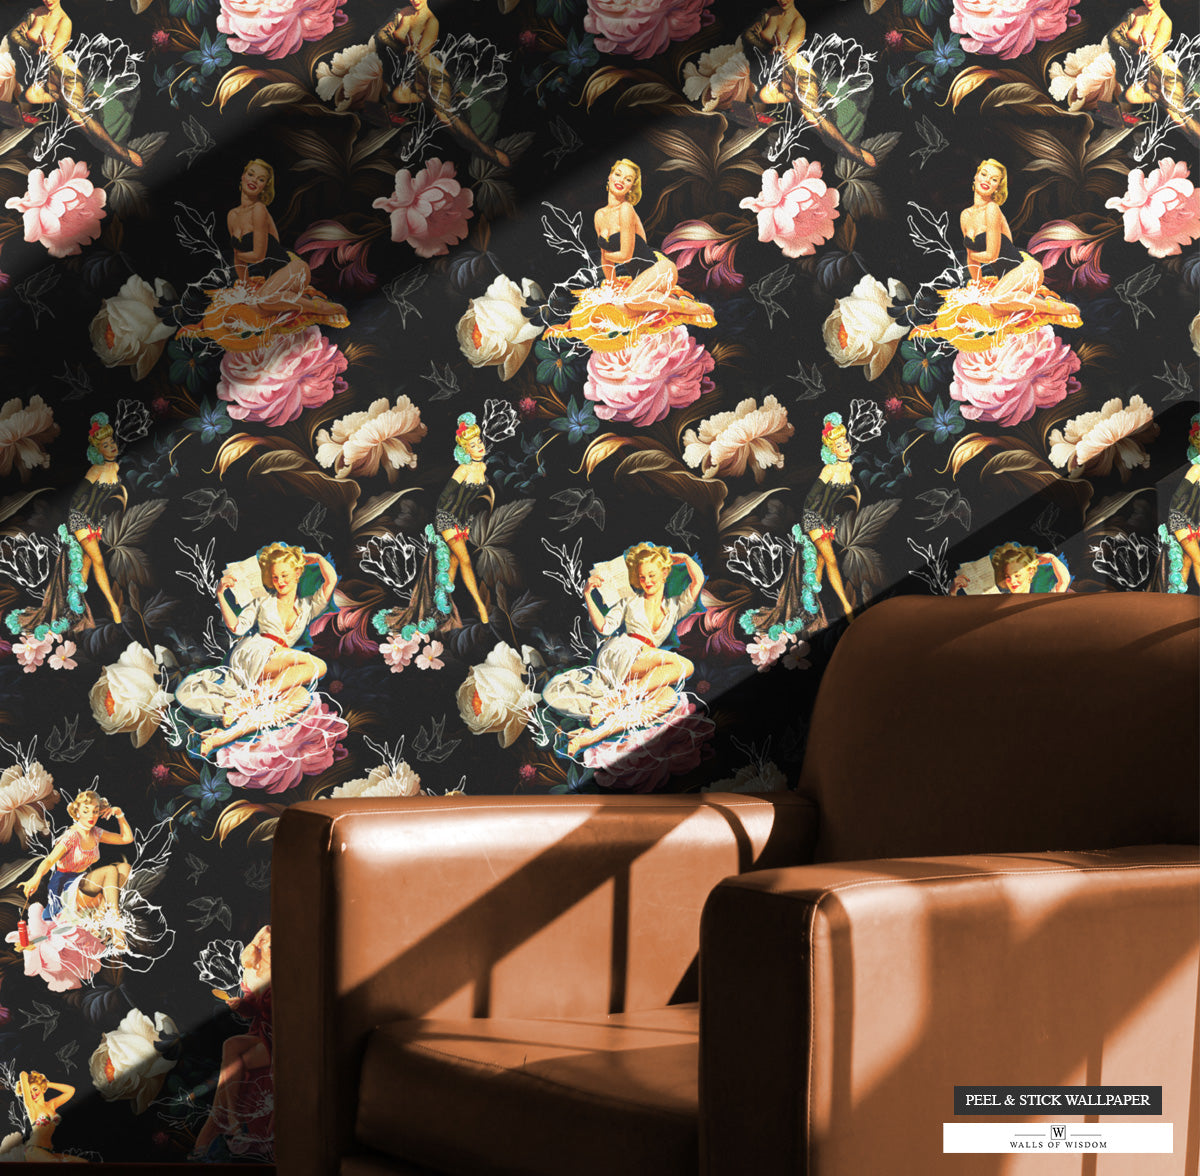 Pinup Girl & Dark Pink Rose Wallpaper featuring vintage style with modern abstract floral overlays